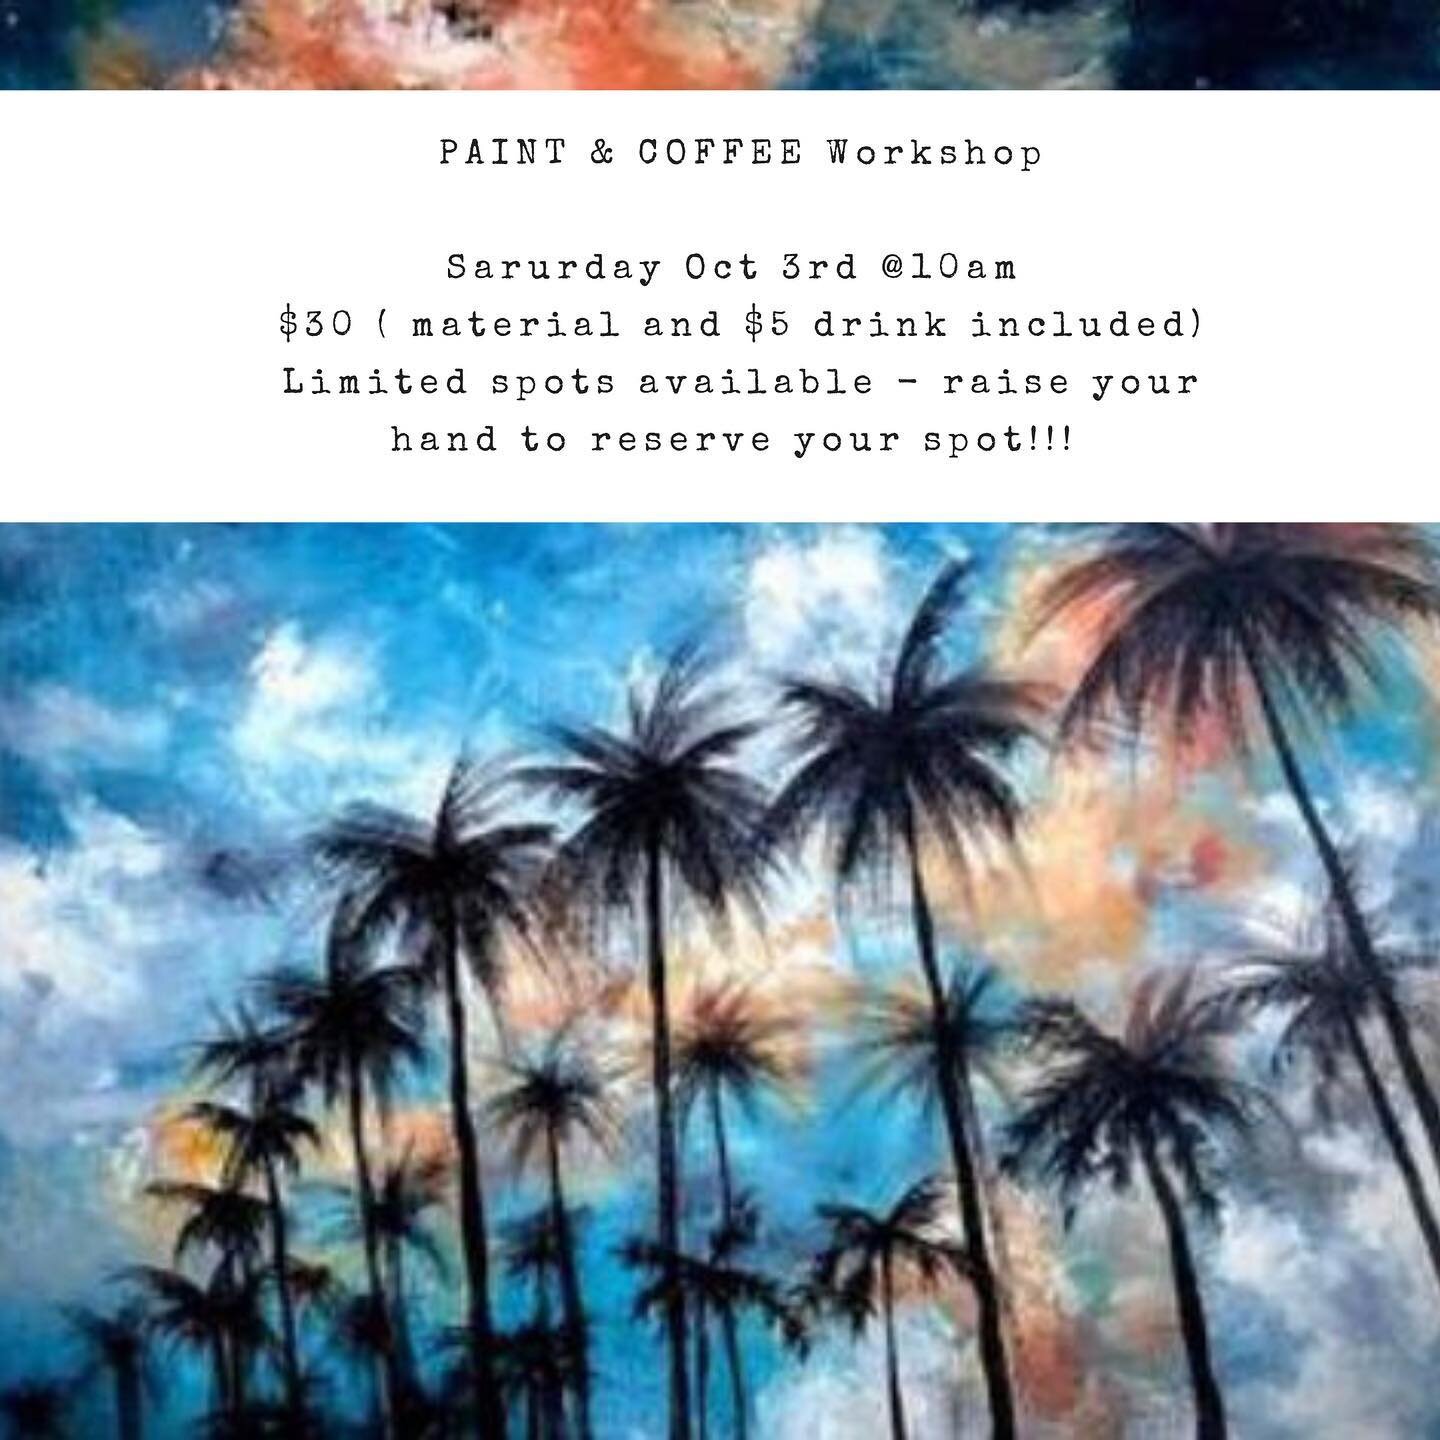 Let&rsquo;s celebrate #nationalcoffeeday with a Paint 🎨 and Coffee ☕️ party 🎉 this up coming Saturday Oct 3rd at 10am. 

Face masks are required during the workshop. 

✨🎨☕️

#artsy #coffeeandpainting☕🎨 #liquidbean #outdooractivity #sarurdaymornin